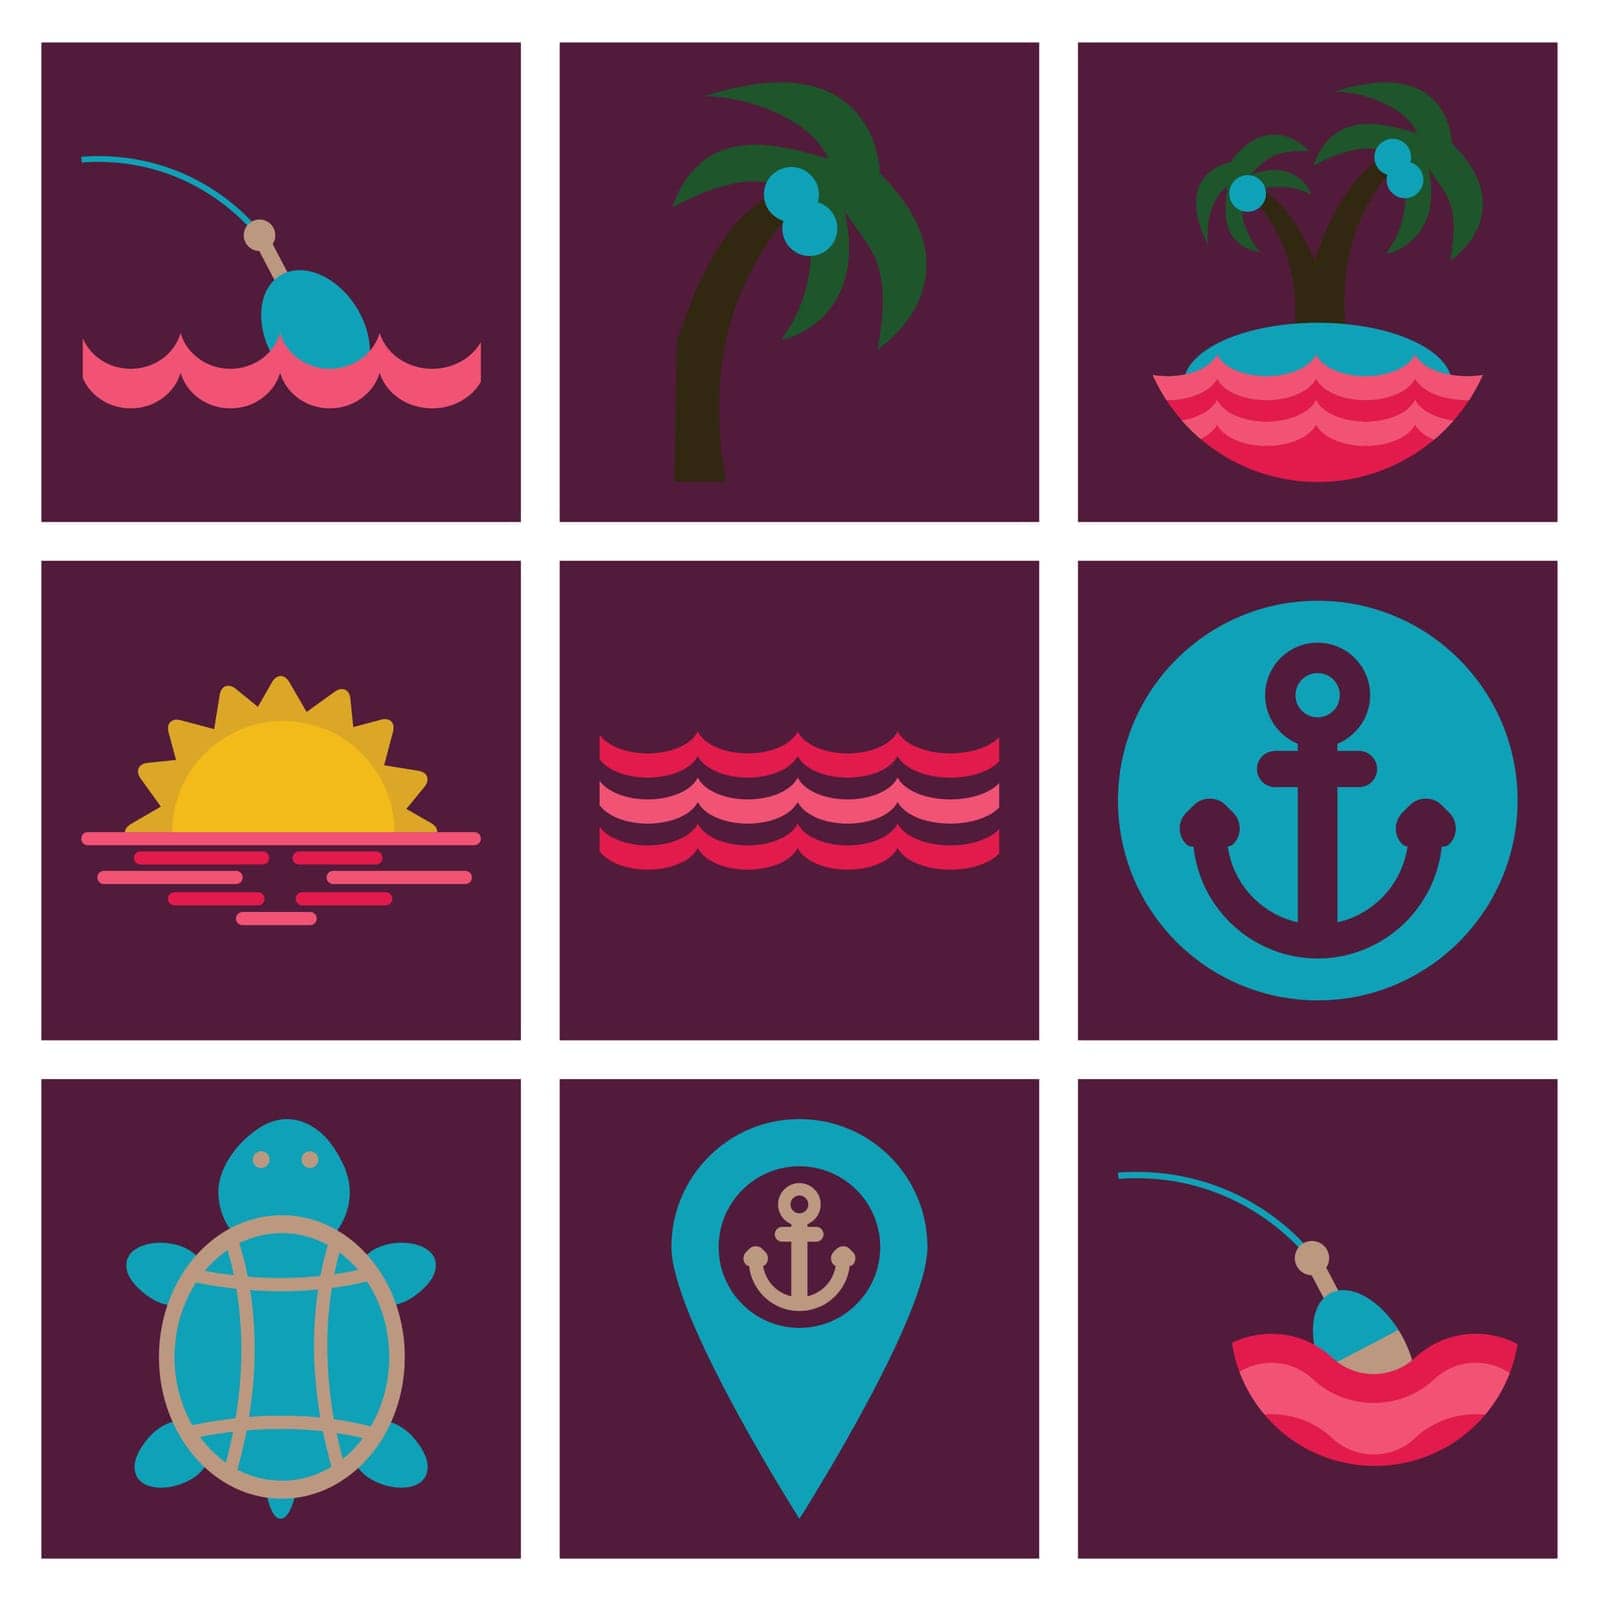 drop,symbol,sailboat,sail,icon,sign,tourism,simple,type,interface,sun,summer,sea,wave,marine,design,logo,season,vacation,vector,graphic,group,element,set,vest,abstract,collection,technology,icons,water,creative,boat,nautical,ocean,compass,beach,fish,cruise,paradise,style,information,maritime,illustration,travel